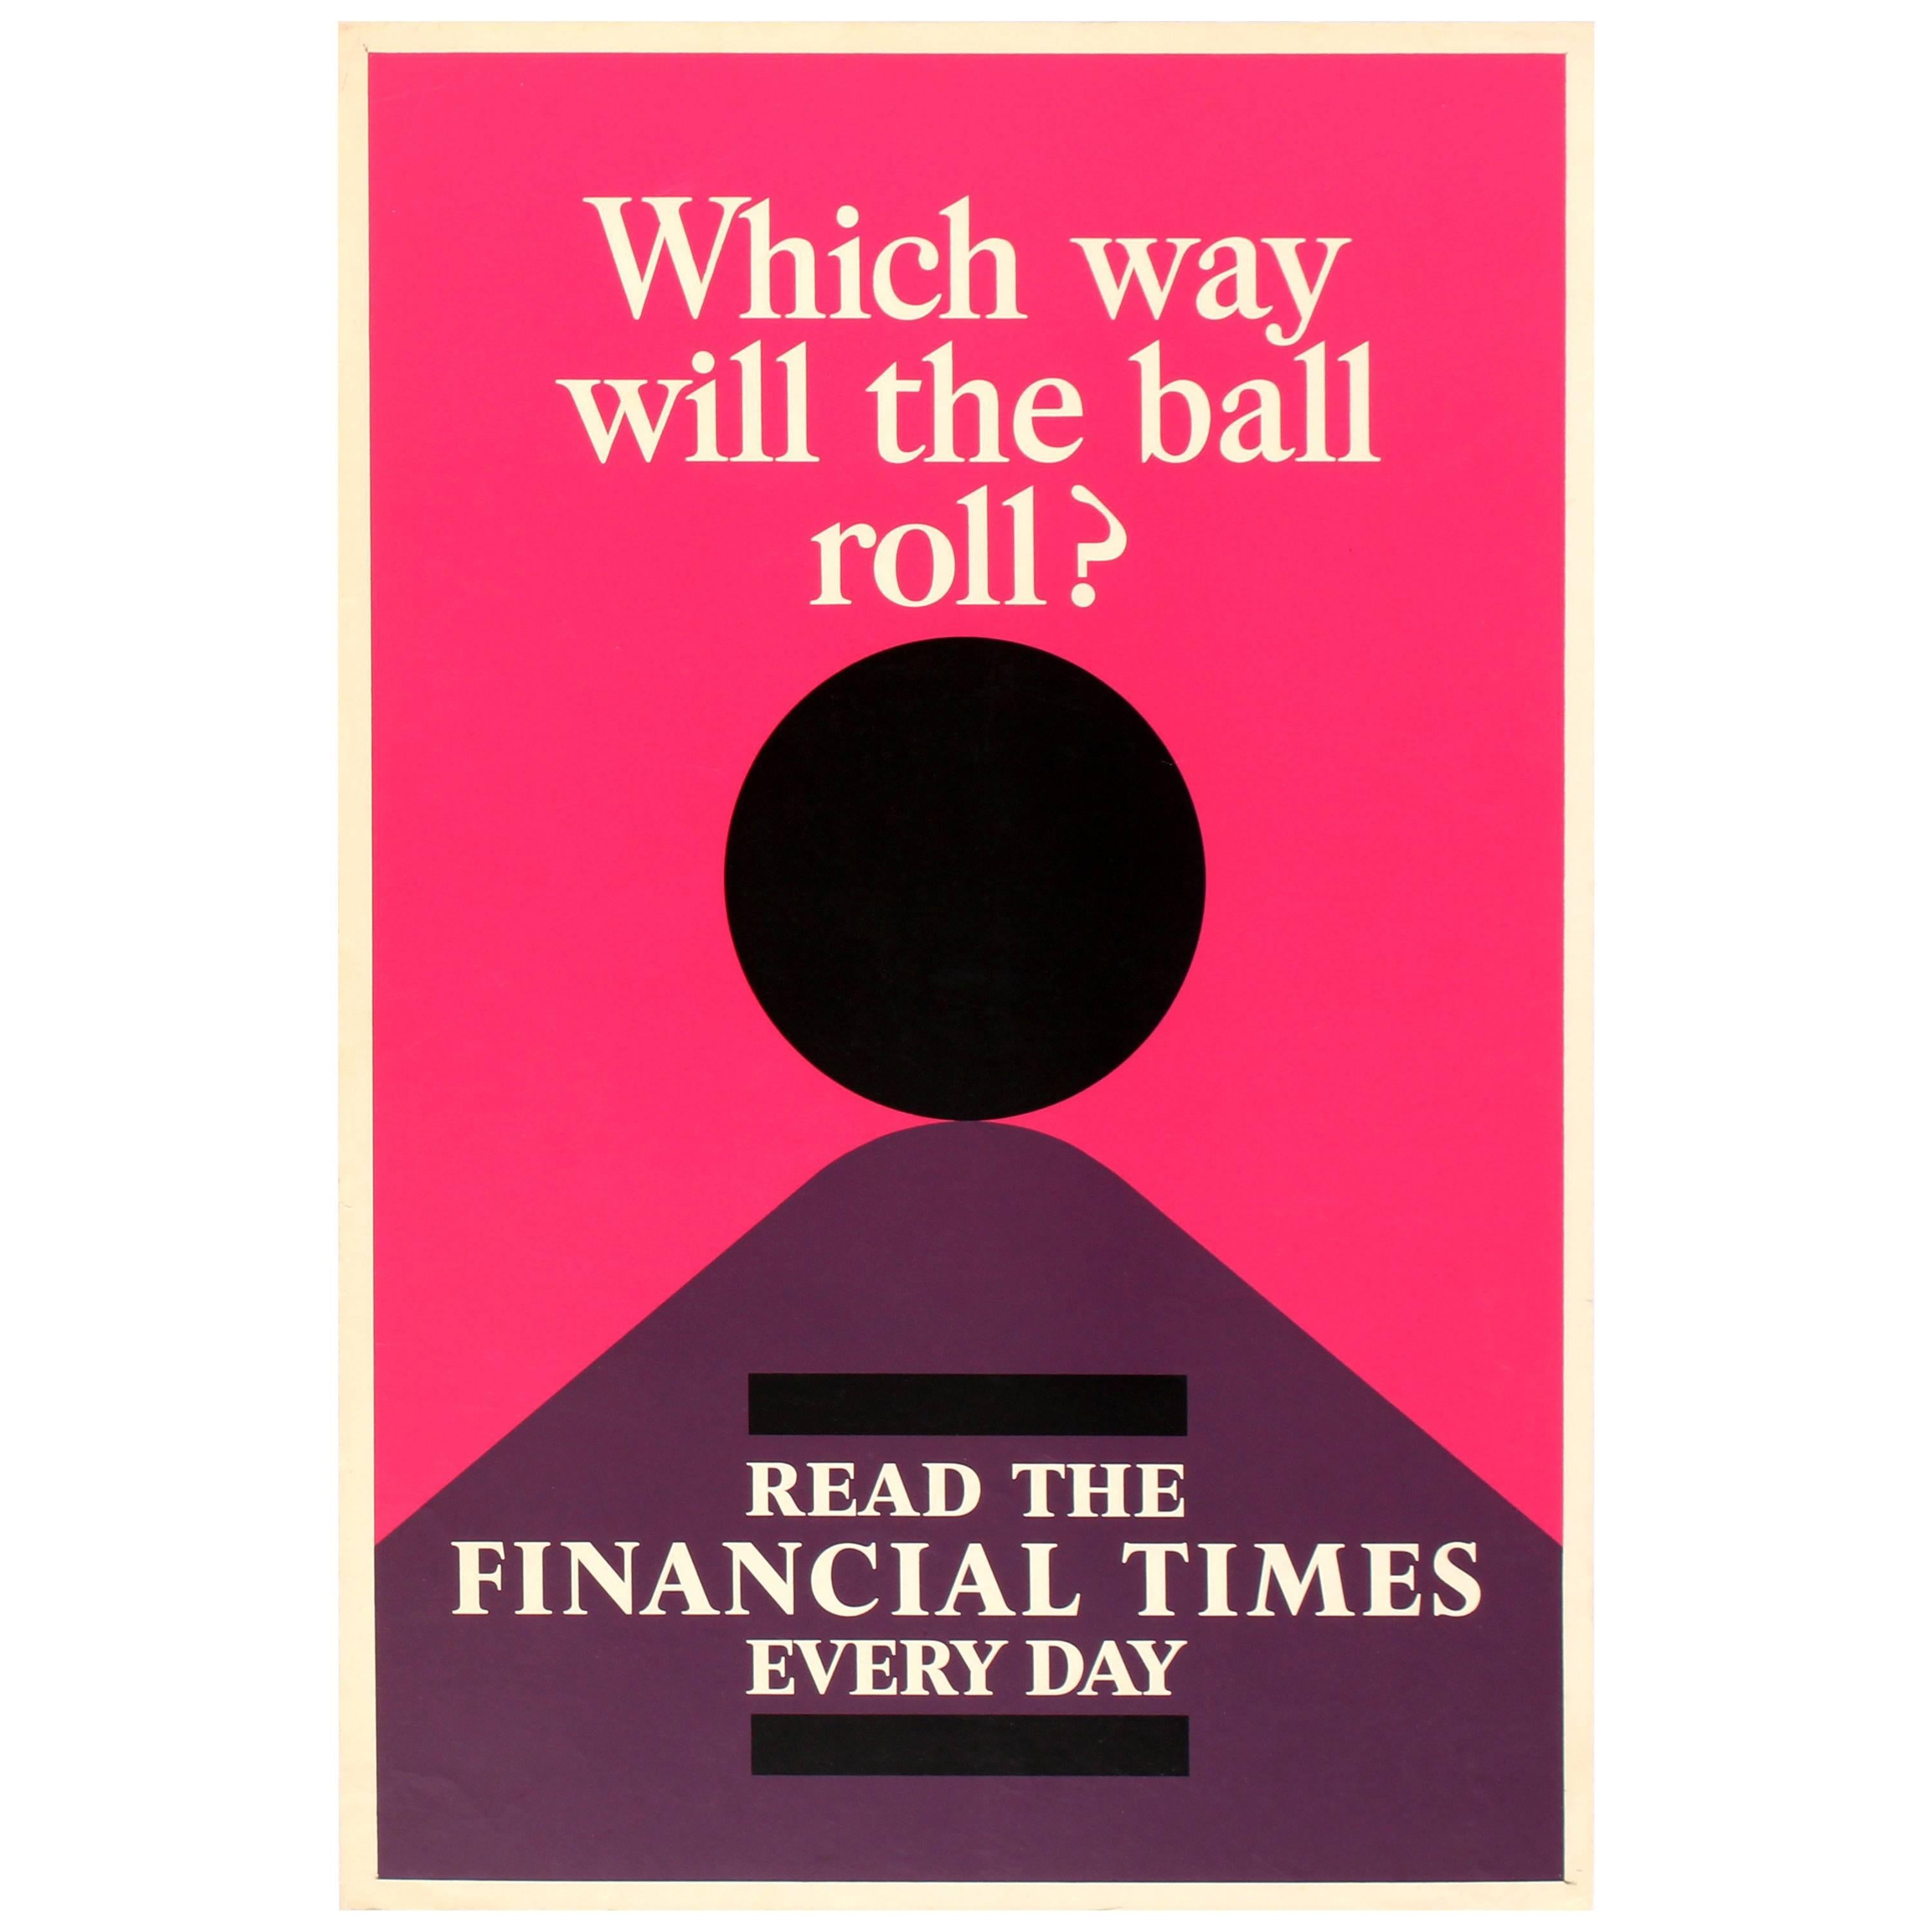 Original Vintage Financial Times Poster Which Way Will the Ball Roll Read the FT